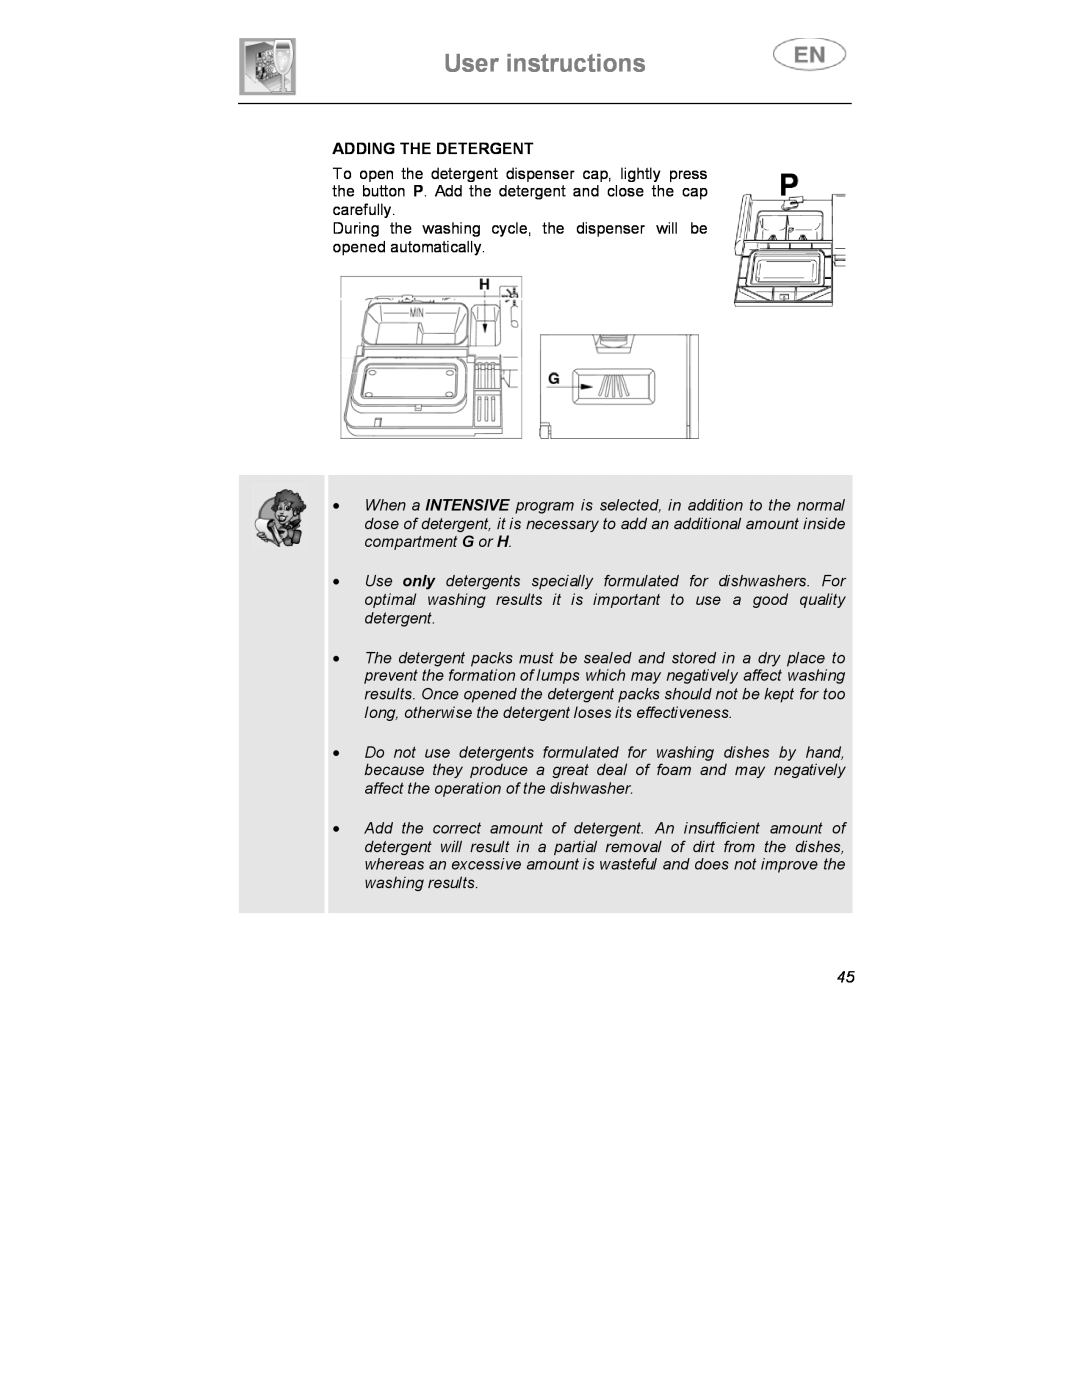 Smeg DWD409WH, DWD409SS instruction manual Adding The Detergent, User instructions 